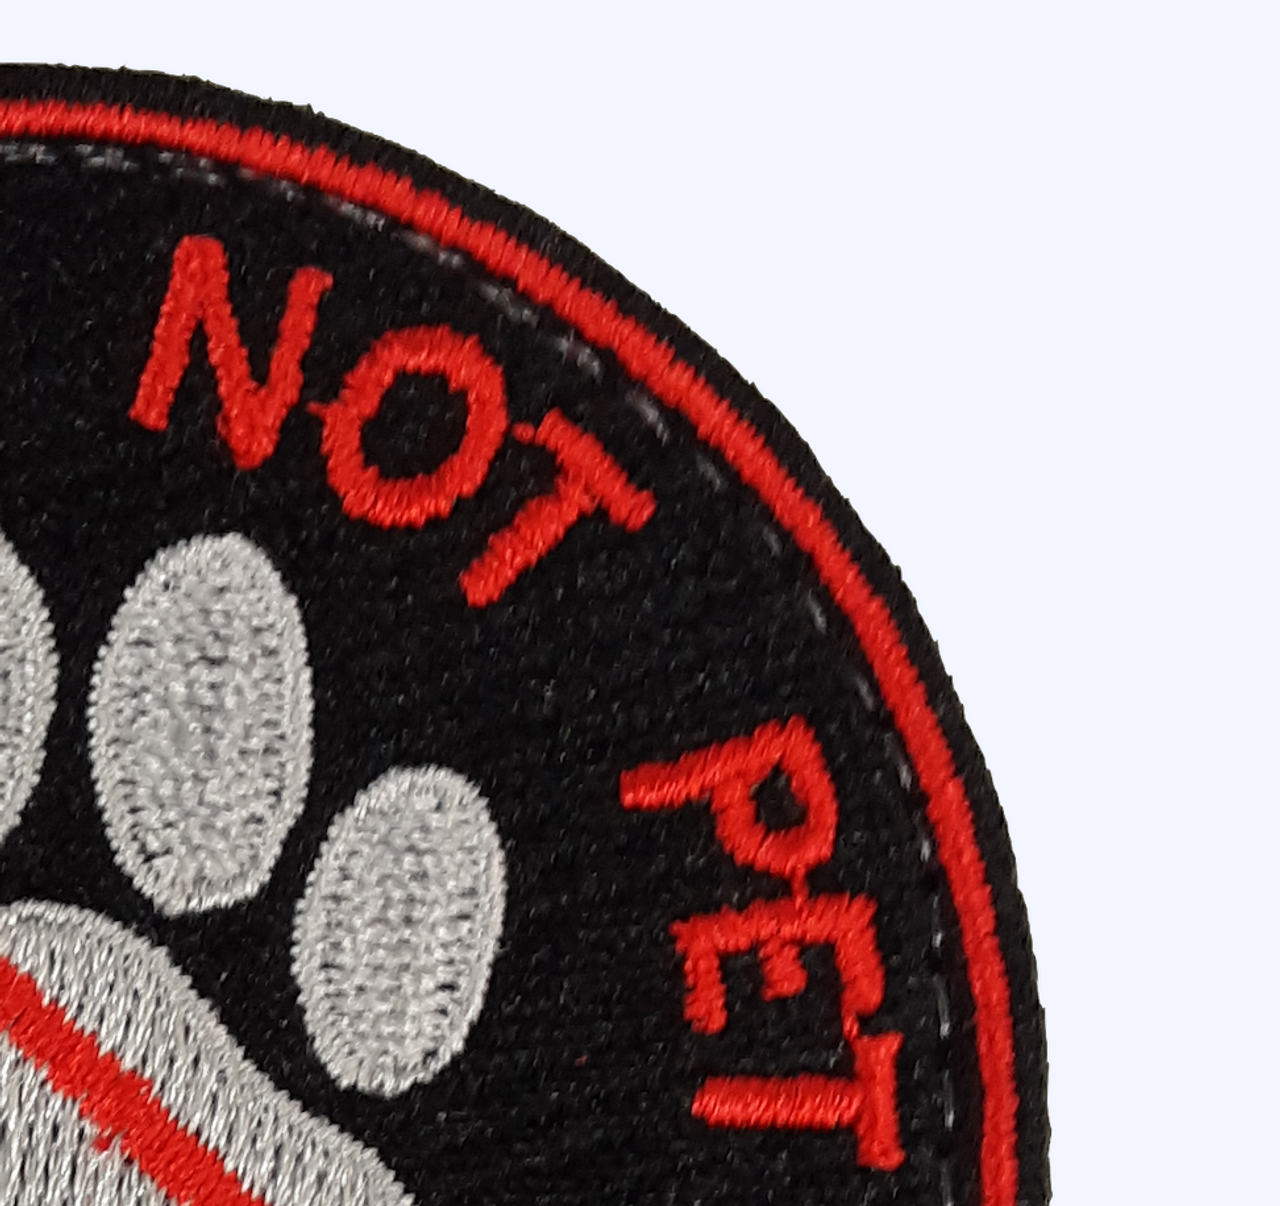 Do Not Pet - Im Working Service Dog Patch